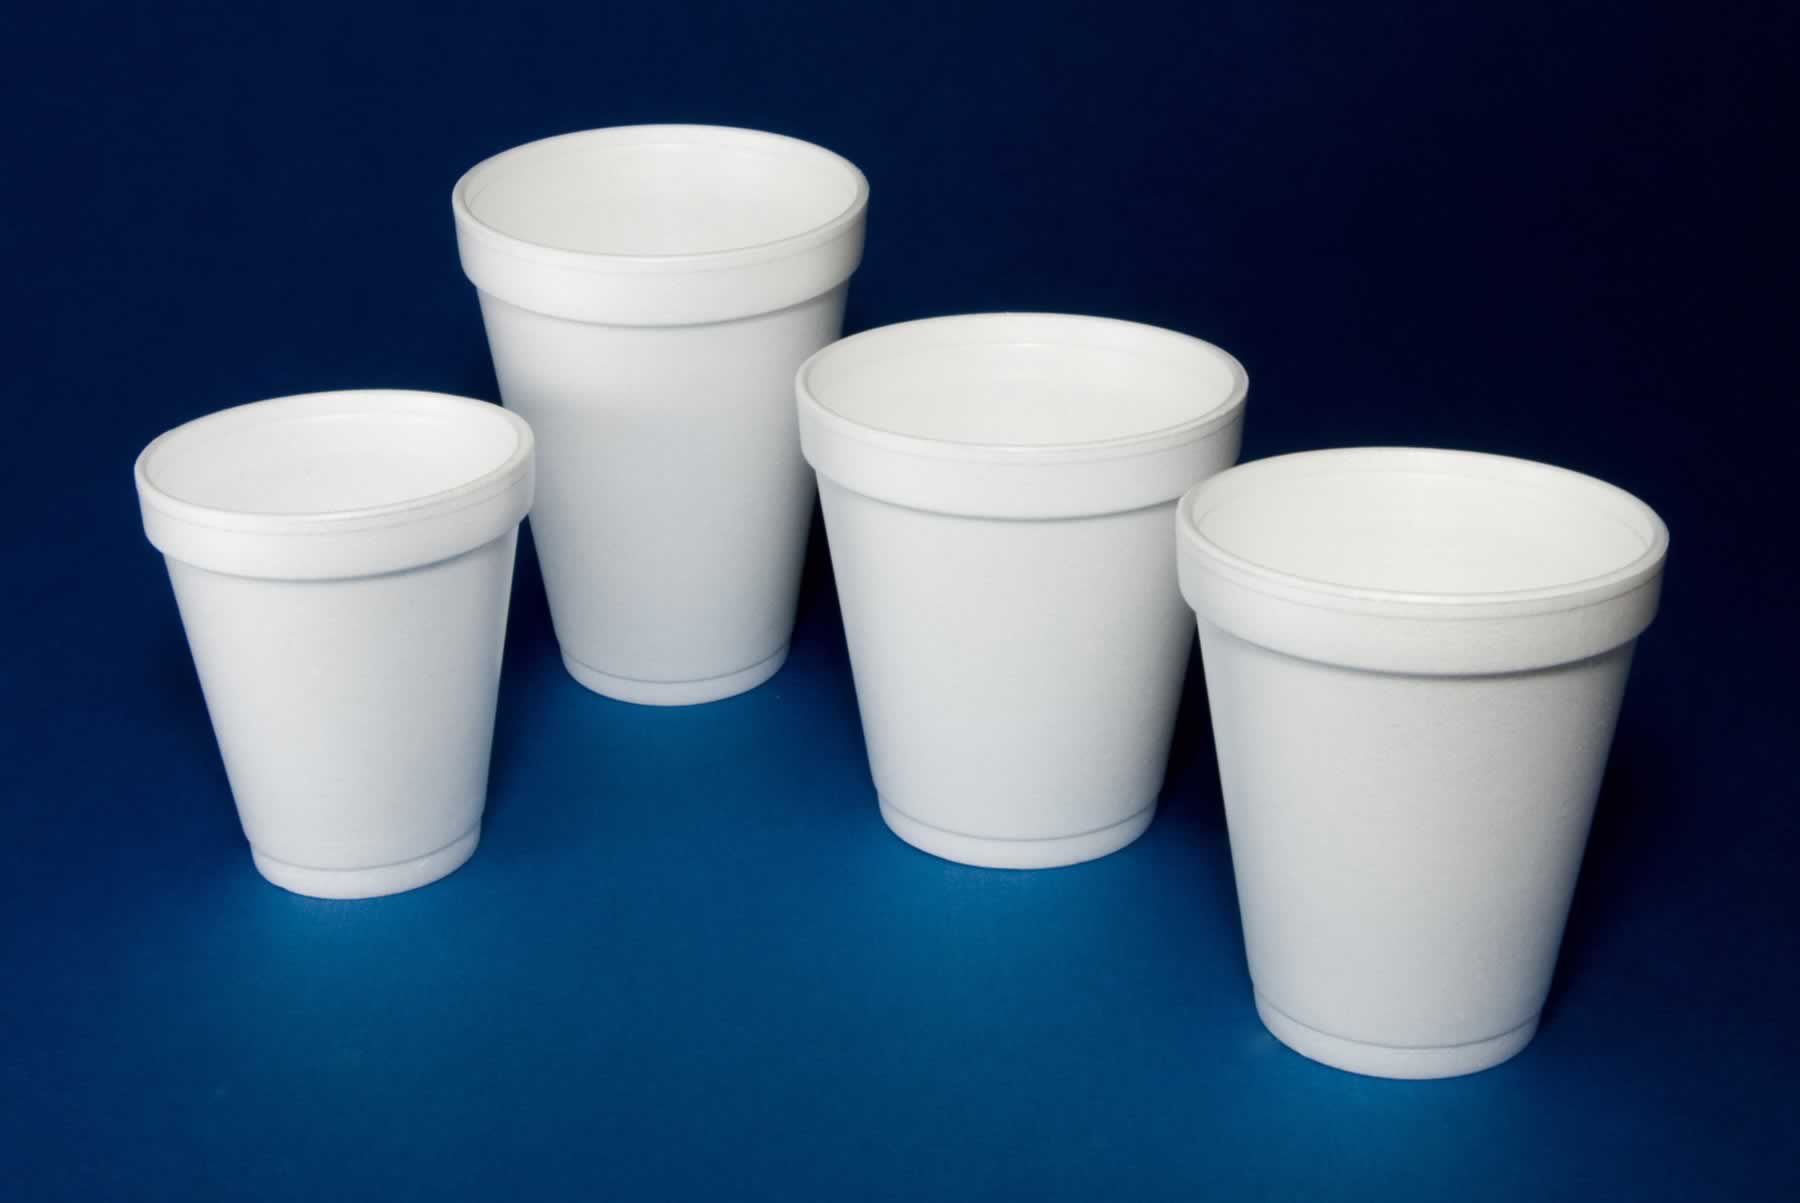 https://res.cloudinary.com/ouwp/images/f_auto,q_auto/v1675108466/Kosher/kosher/styrofoam-cups/styrofoam-cups.jpg?_i=AA